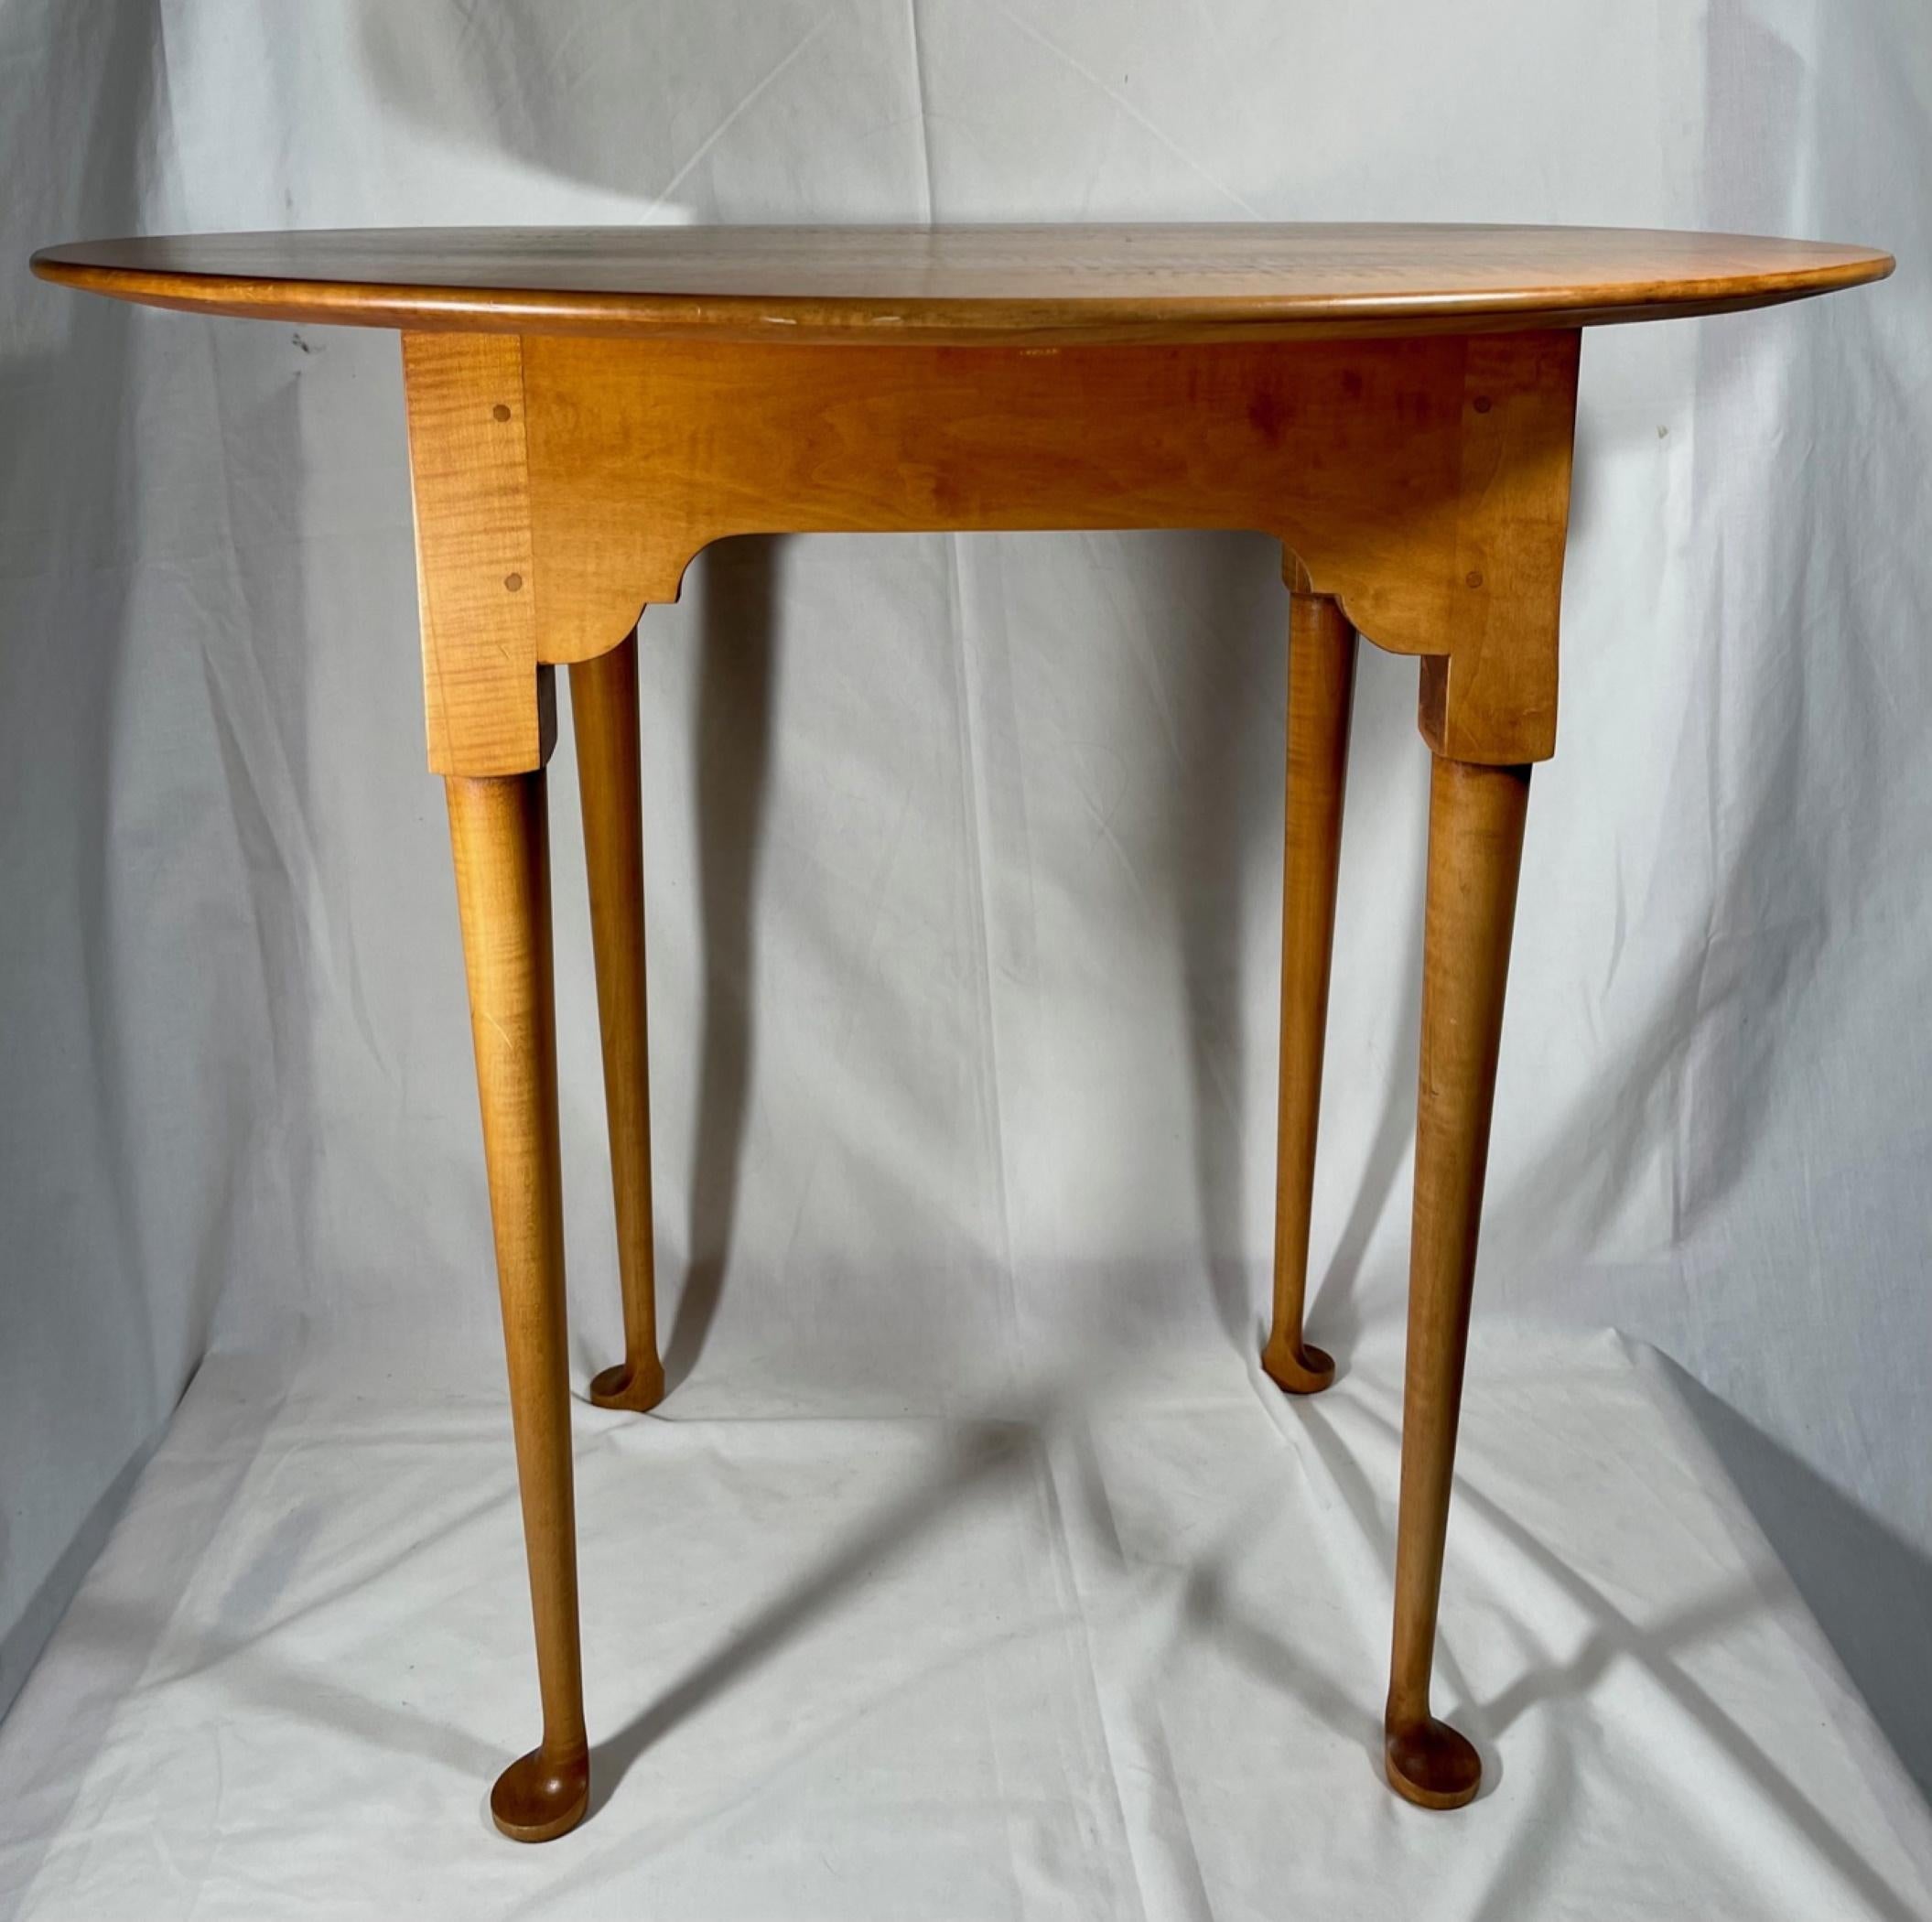 Queen Anne style side table by Eldred Wheeler. 

The oval top side table is made from tiger maple in the American country Queen Anne style of the 18th Century by Eldred Wheeler. This earlier Wheeler creation is beautifully crafted in exacting